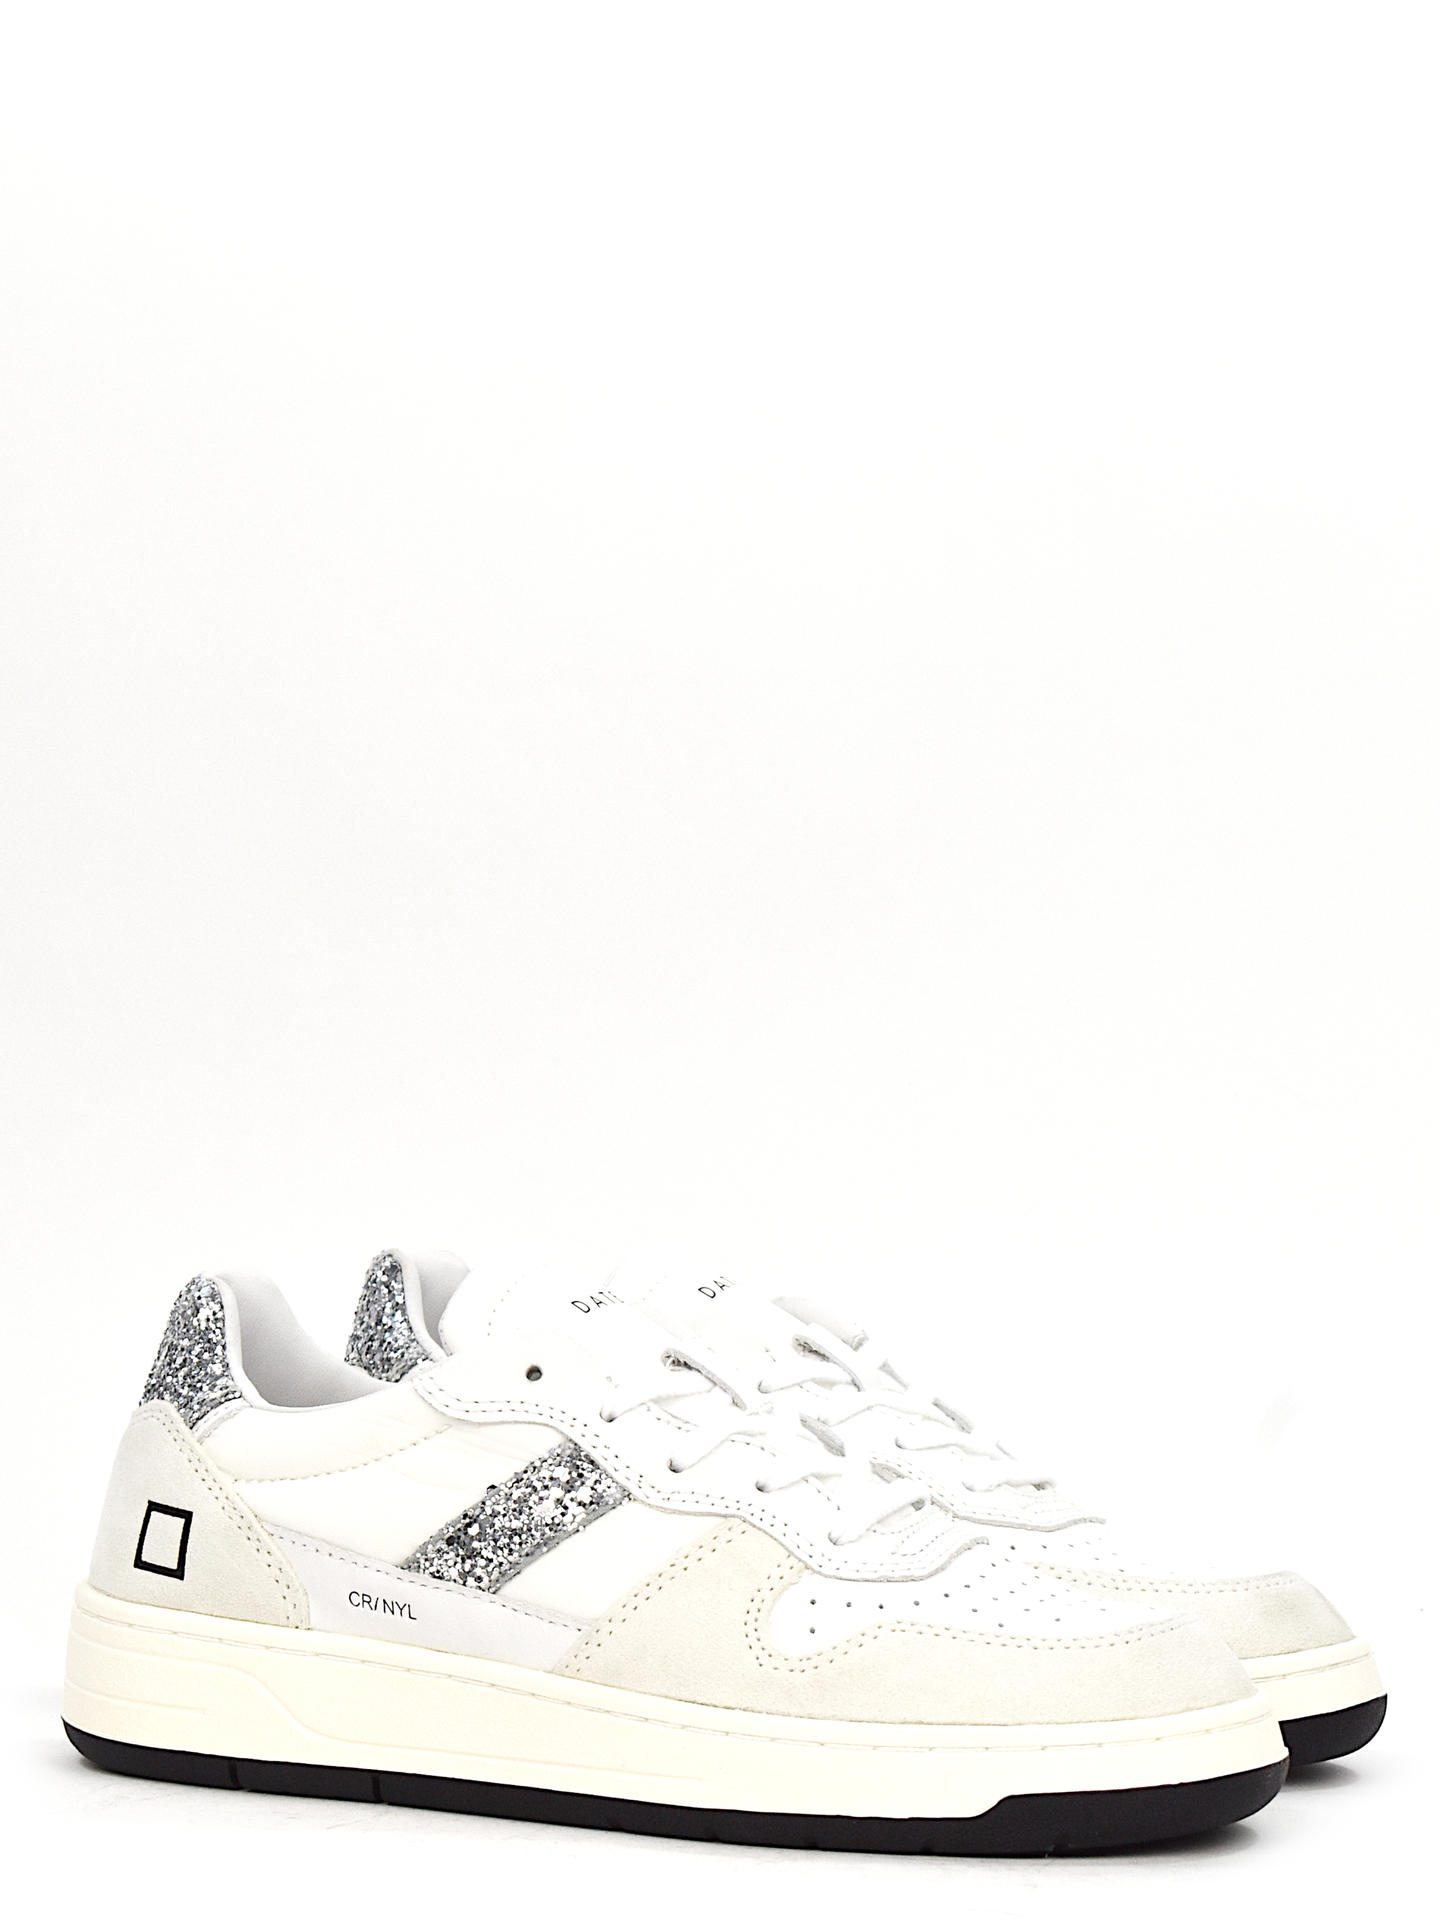 SNEAKERS D.A.T.E C2NYII BIANCO